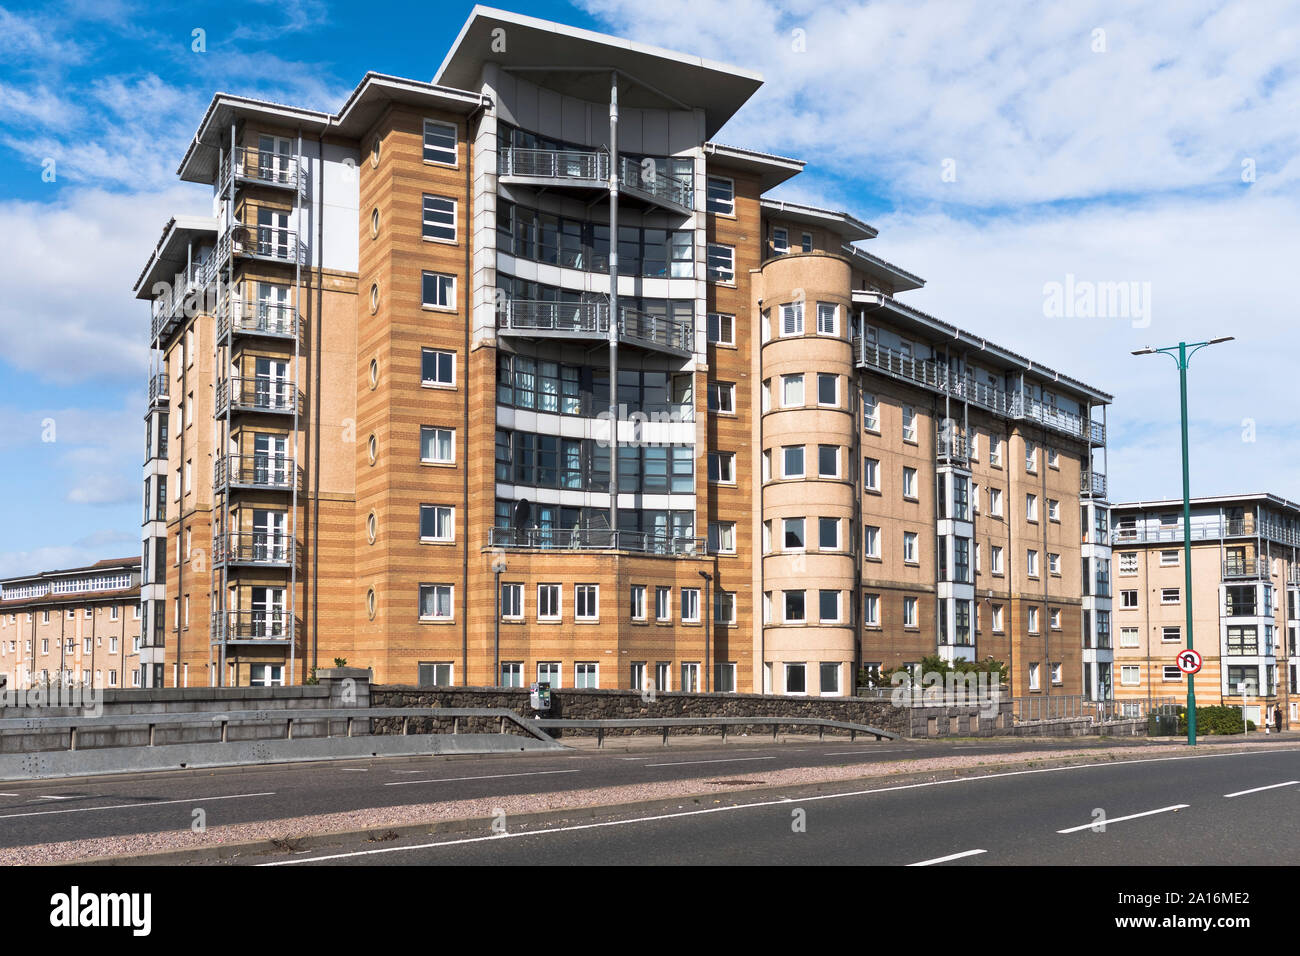 dh New modern apartments BUILDINGS ABERDEEN SCOTLAND Apartment accomodation flats uk city home housing scottish homes properties houses Stock Photo